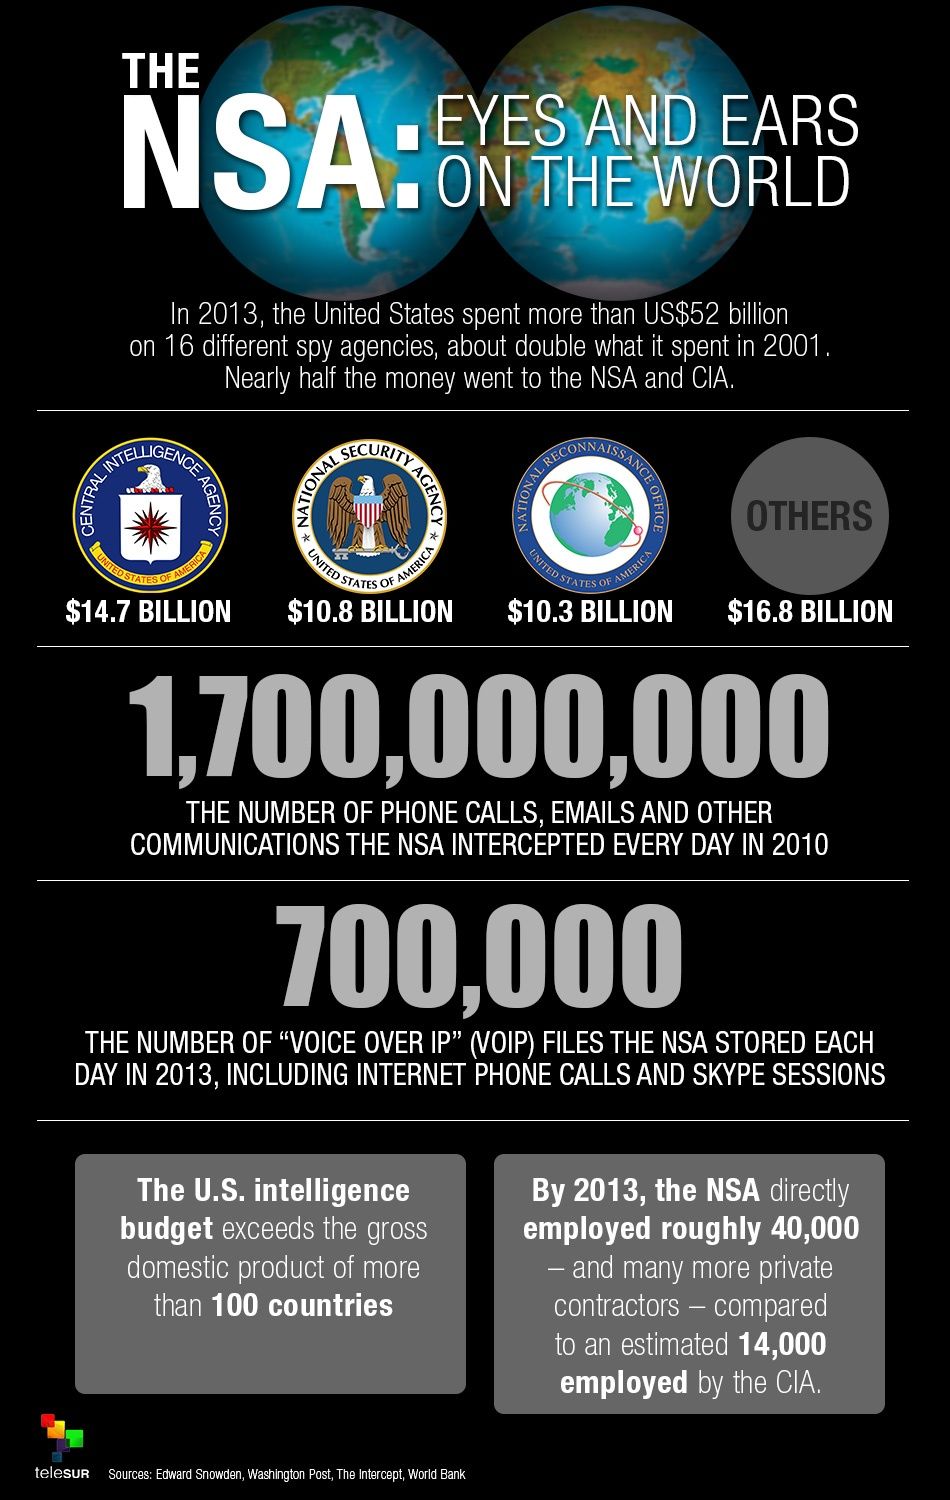 The NSA: Eyes and Ears on the World